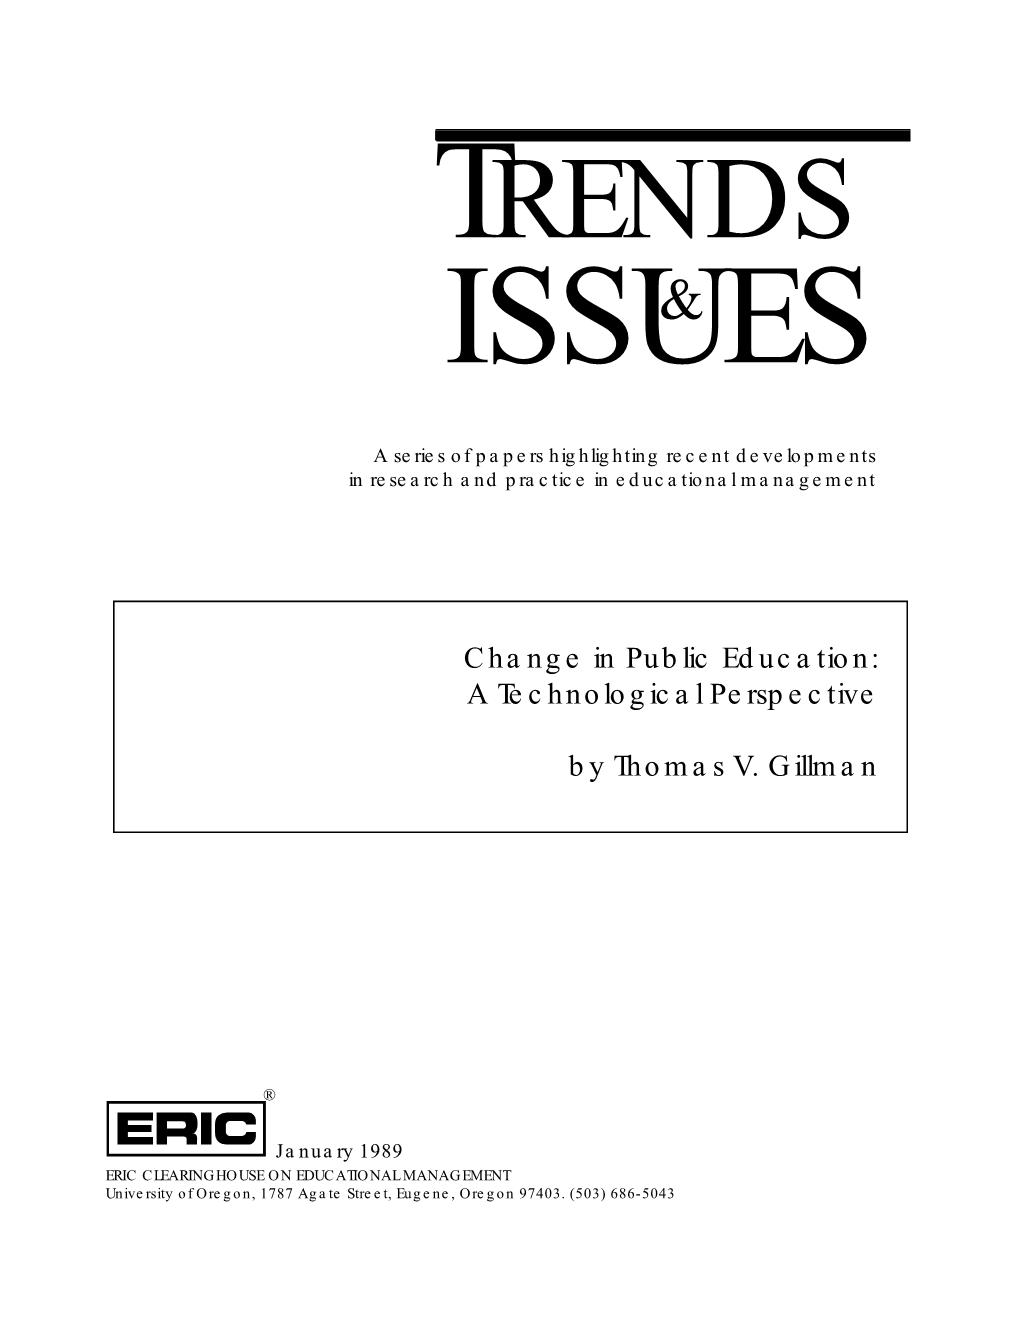 Change in Public Education: a Technological Perspective